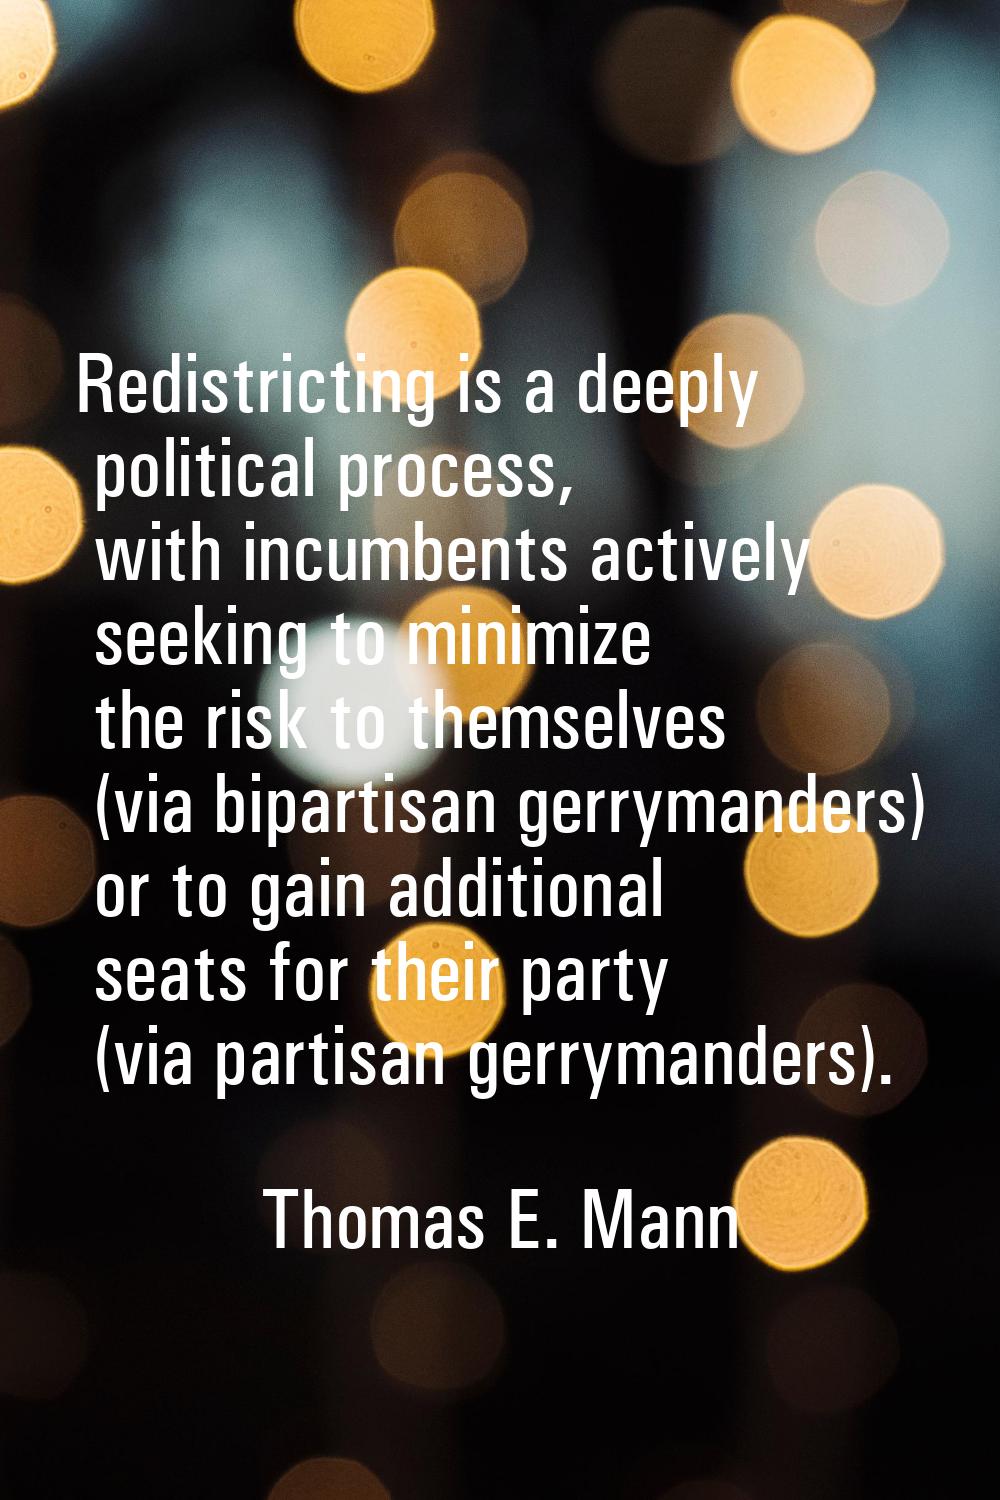 Redistricting is a deeply political process, with incumbents actively seeking to minimize the risk 